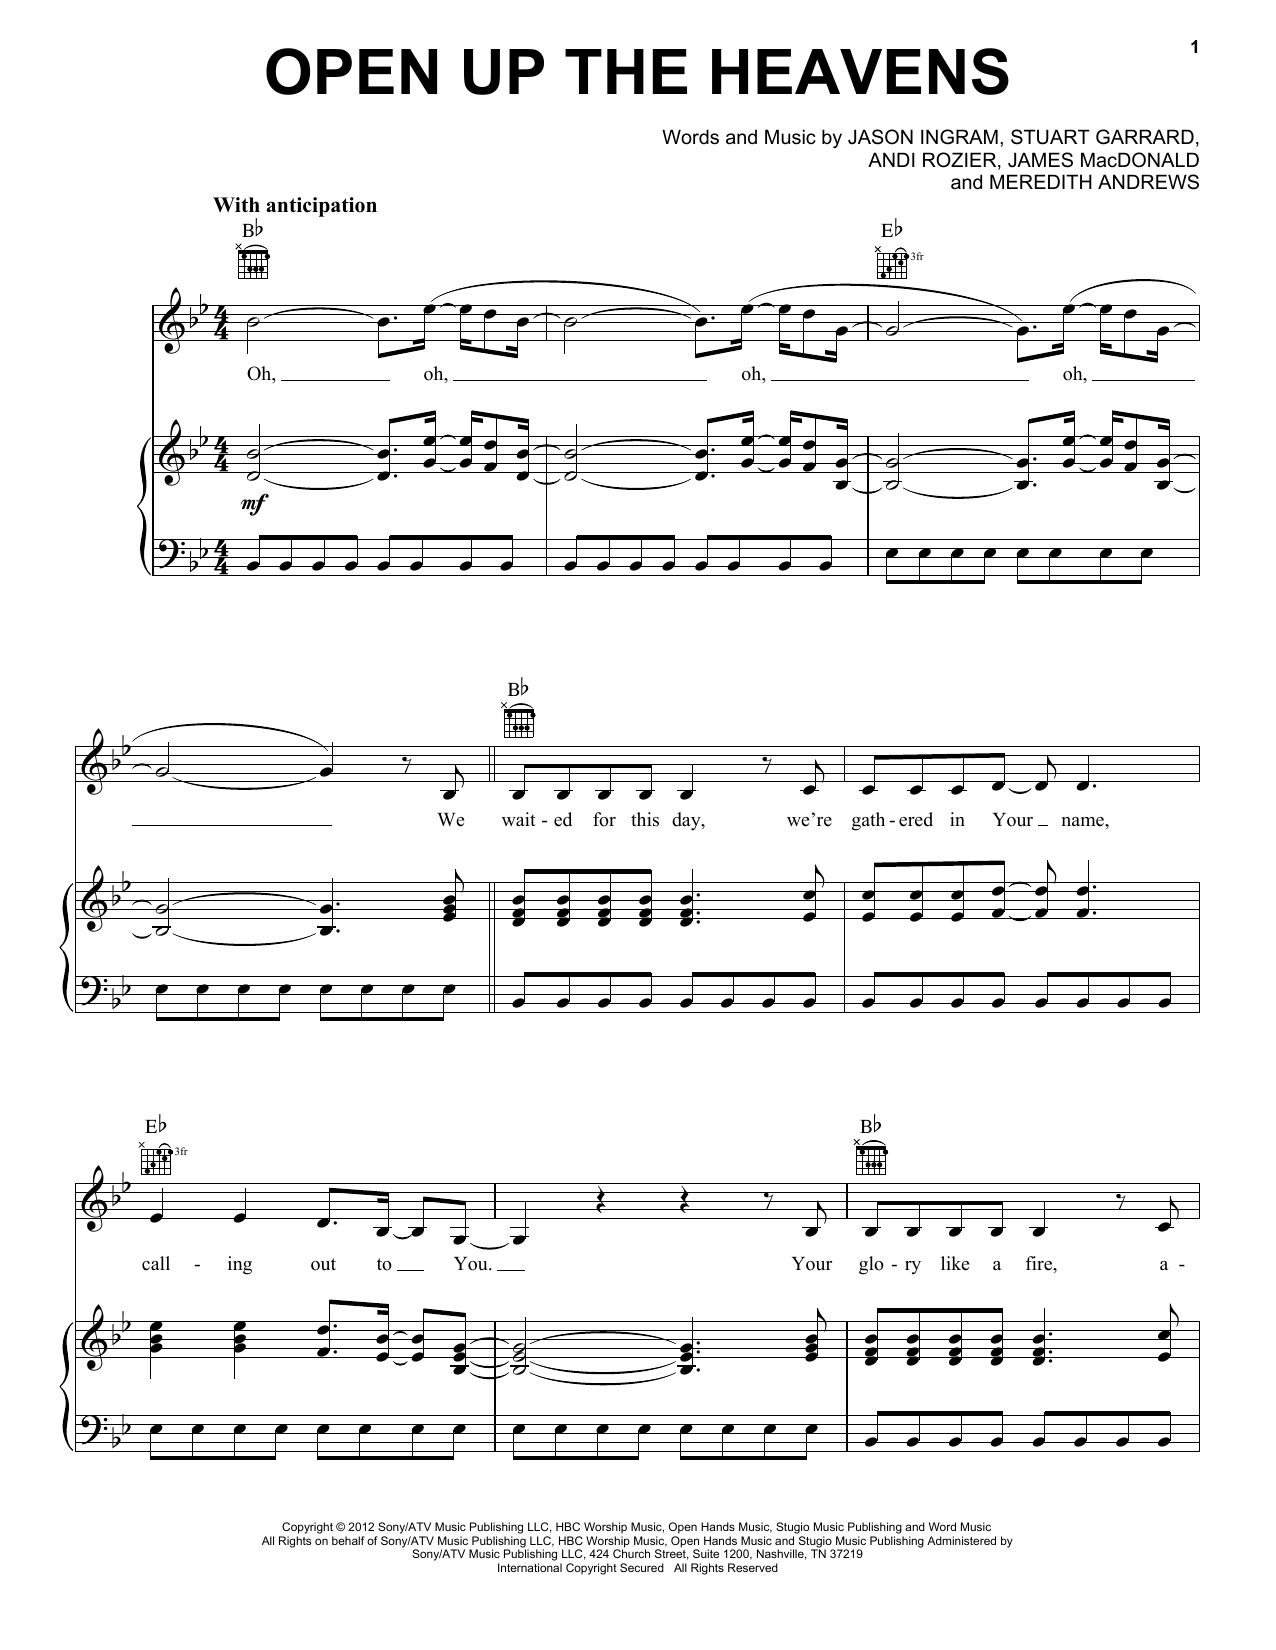 Meredith Andrews Open Up The Heavens sheet music notes printable PDF score